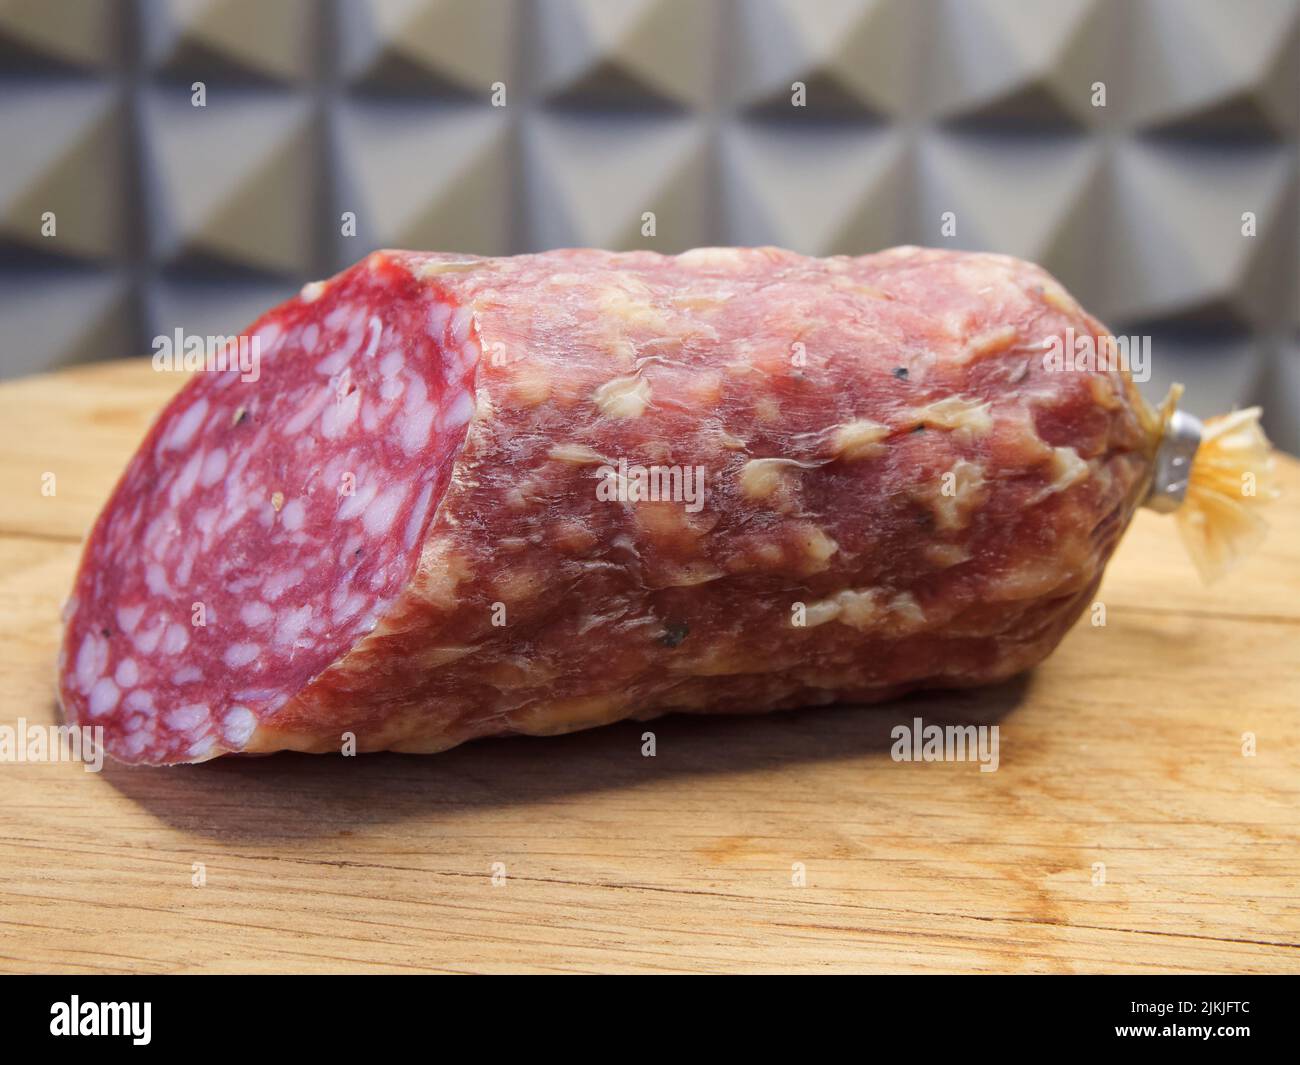 A large piece of smoked sausage on a wooden cutting board. Stock Photo